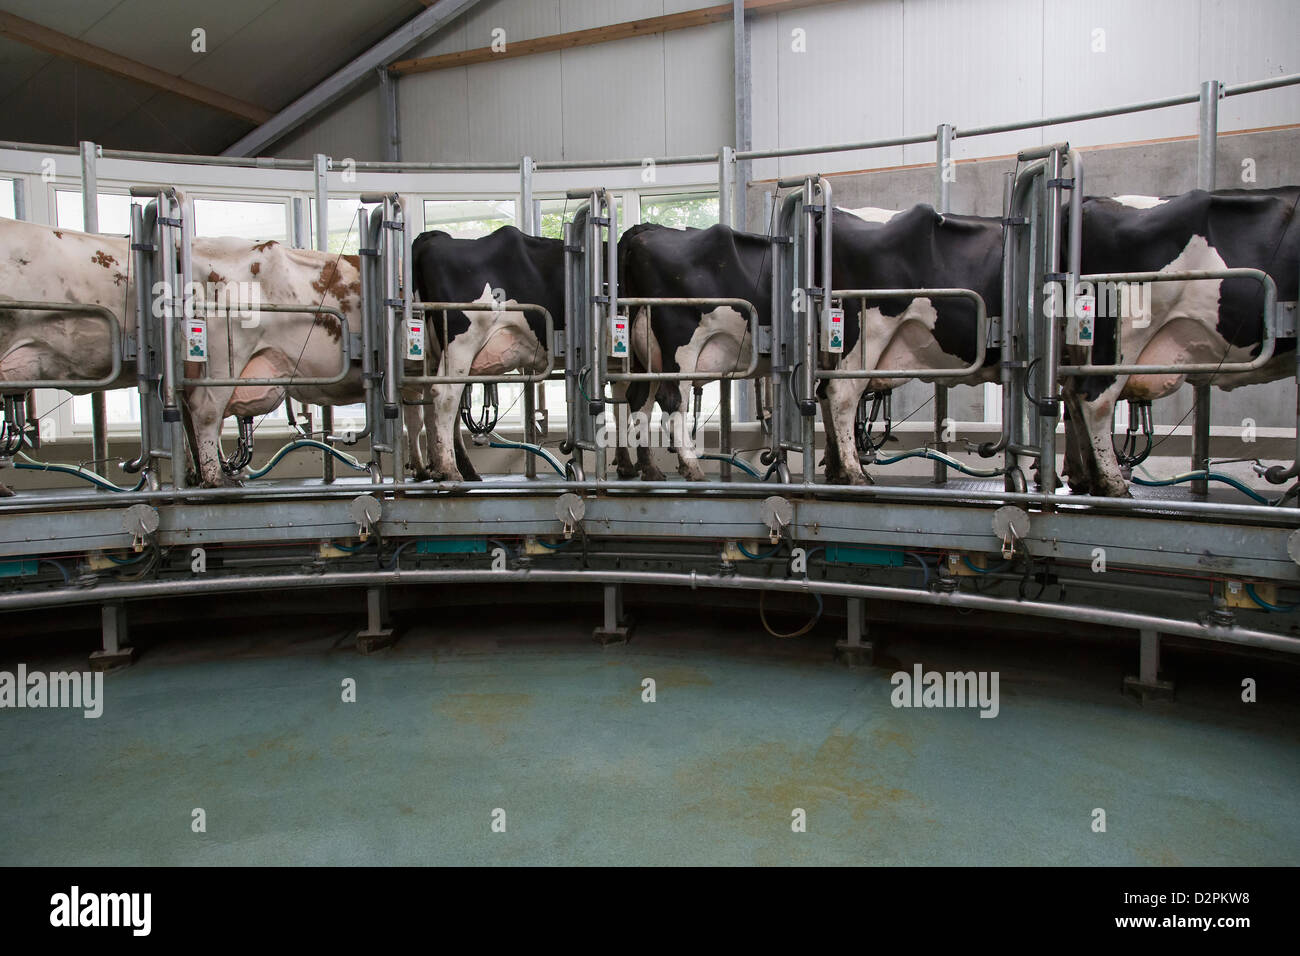 Dairy cows standing together for milking Stock Photo